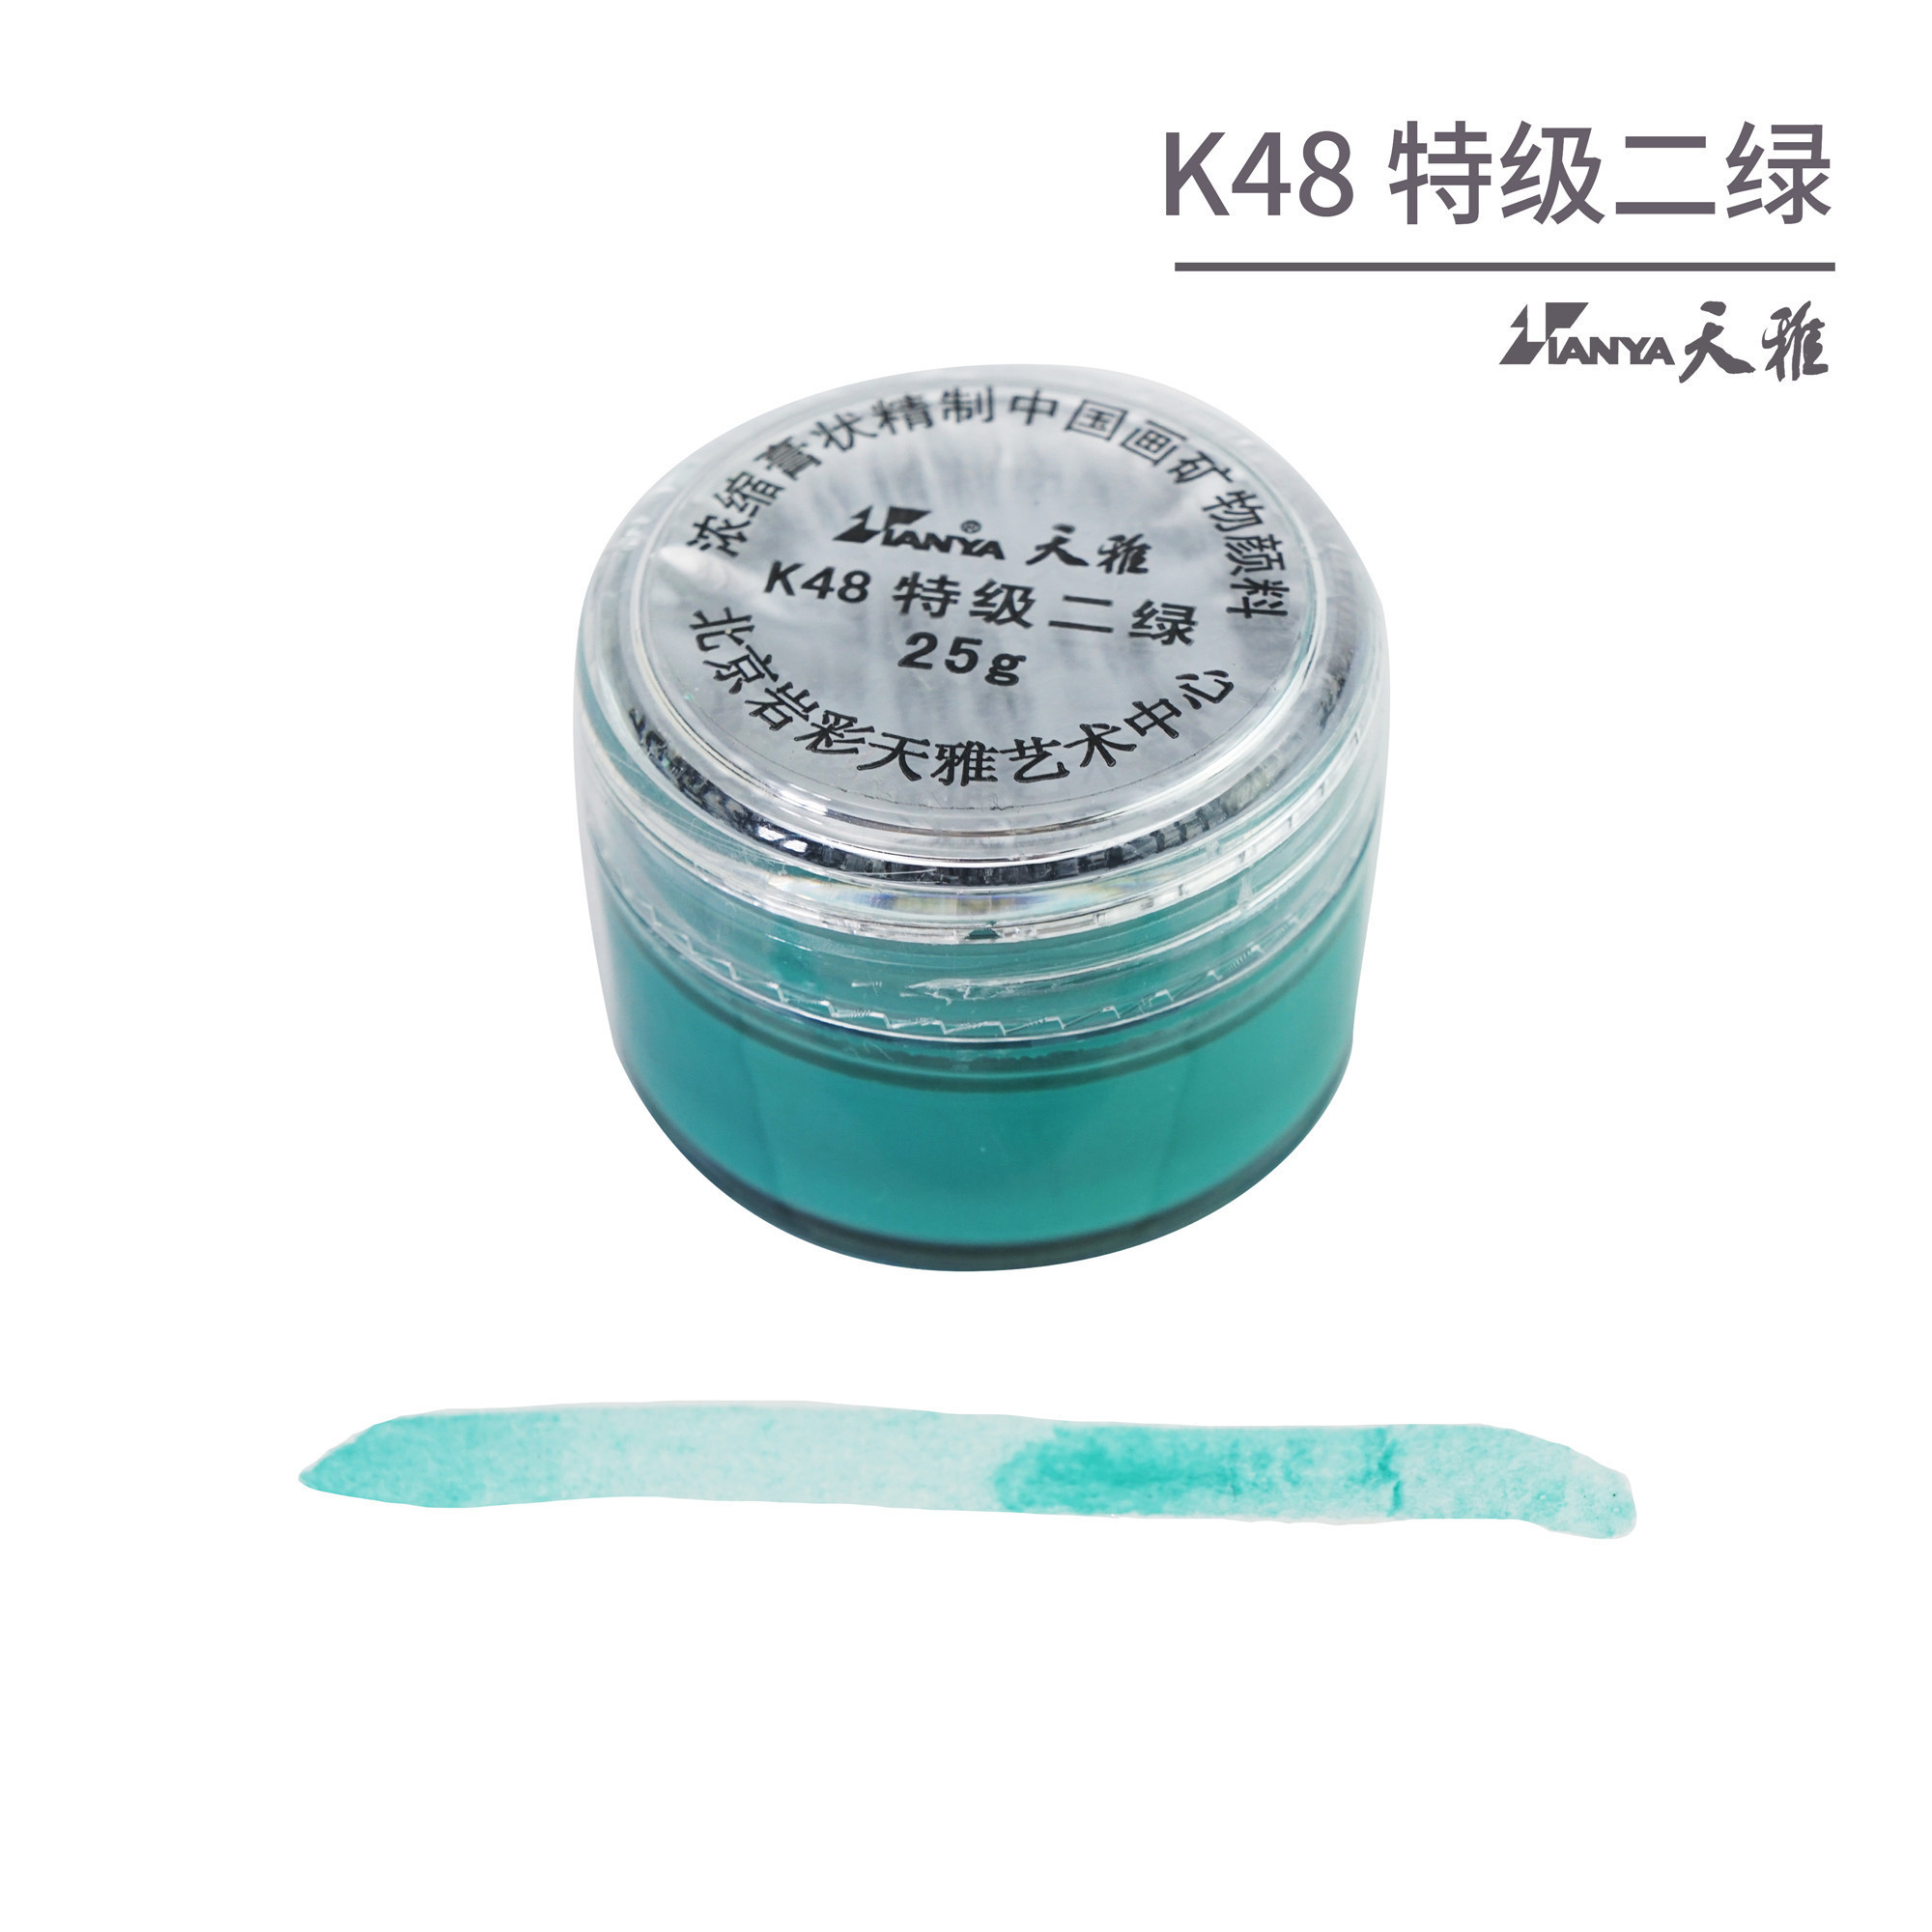 Tianya concentrated paste-shaped with glue mineral pigments State painting ink landscape floral work pen to write K48 Secret Class II Green-Taobao